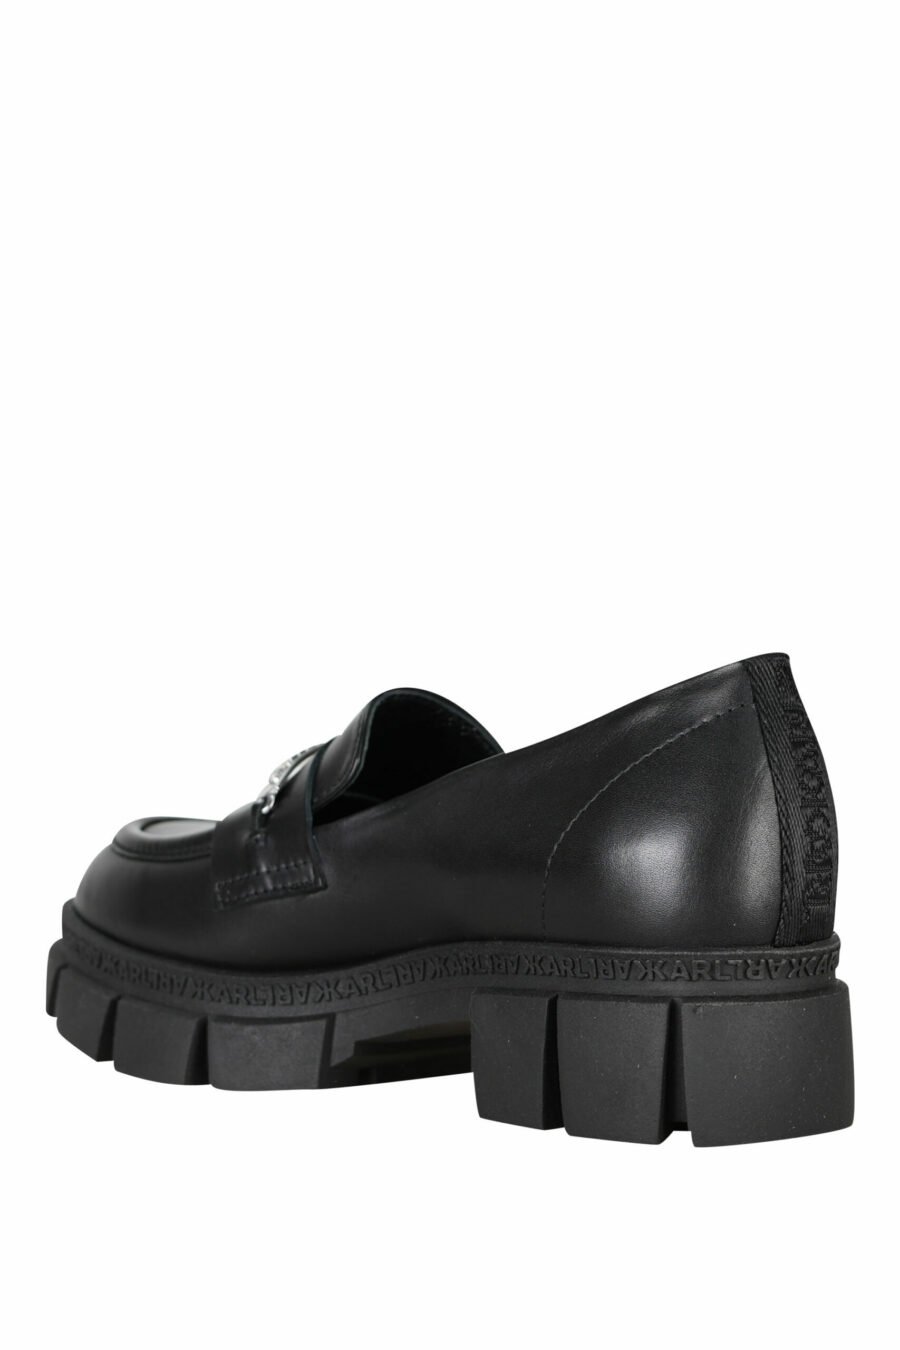 Black loafers with mini-logo and platform - 5059529284977 3 scaled